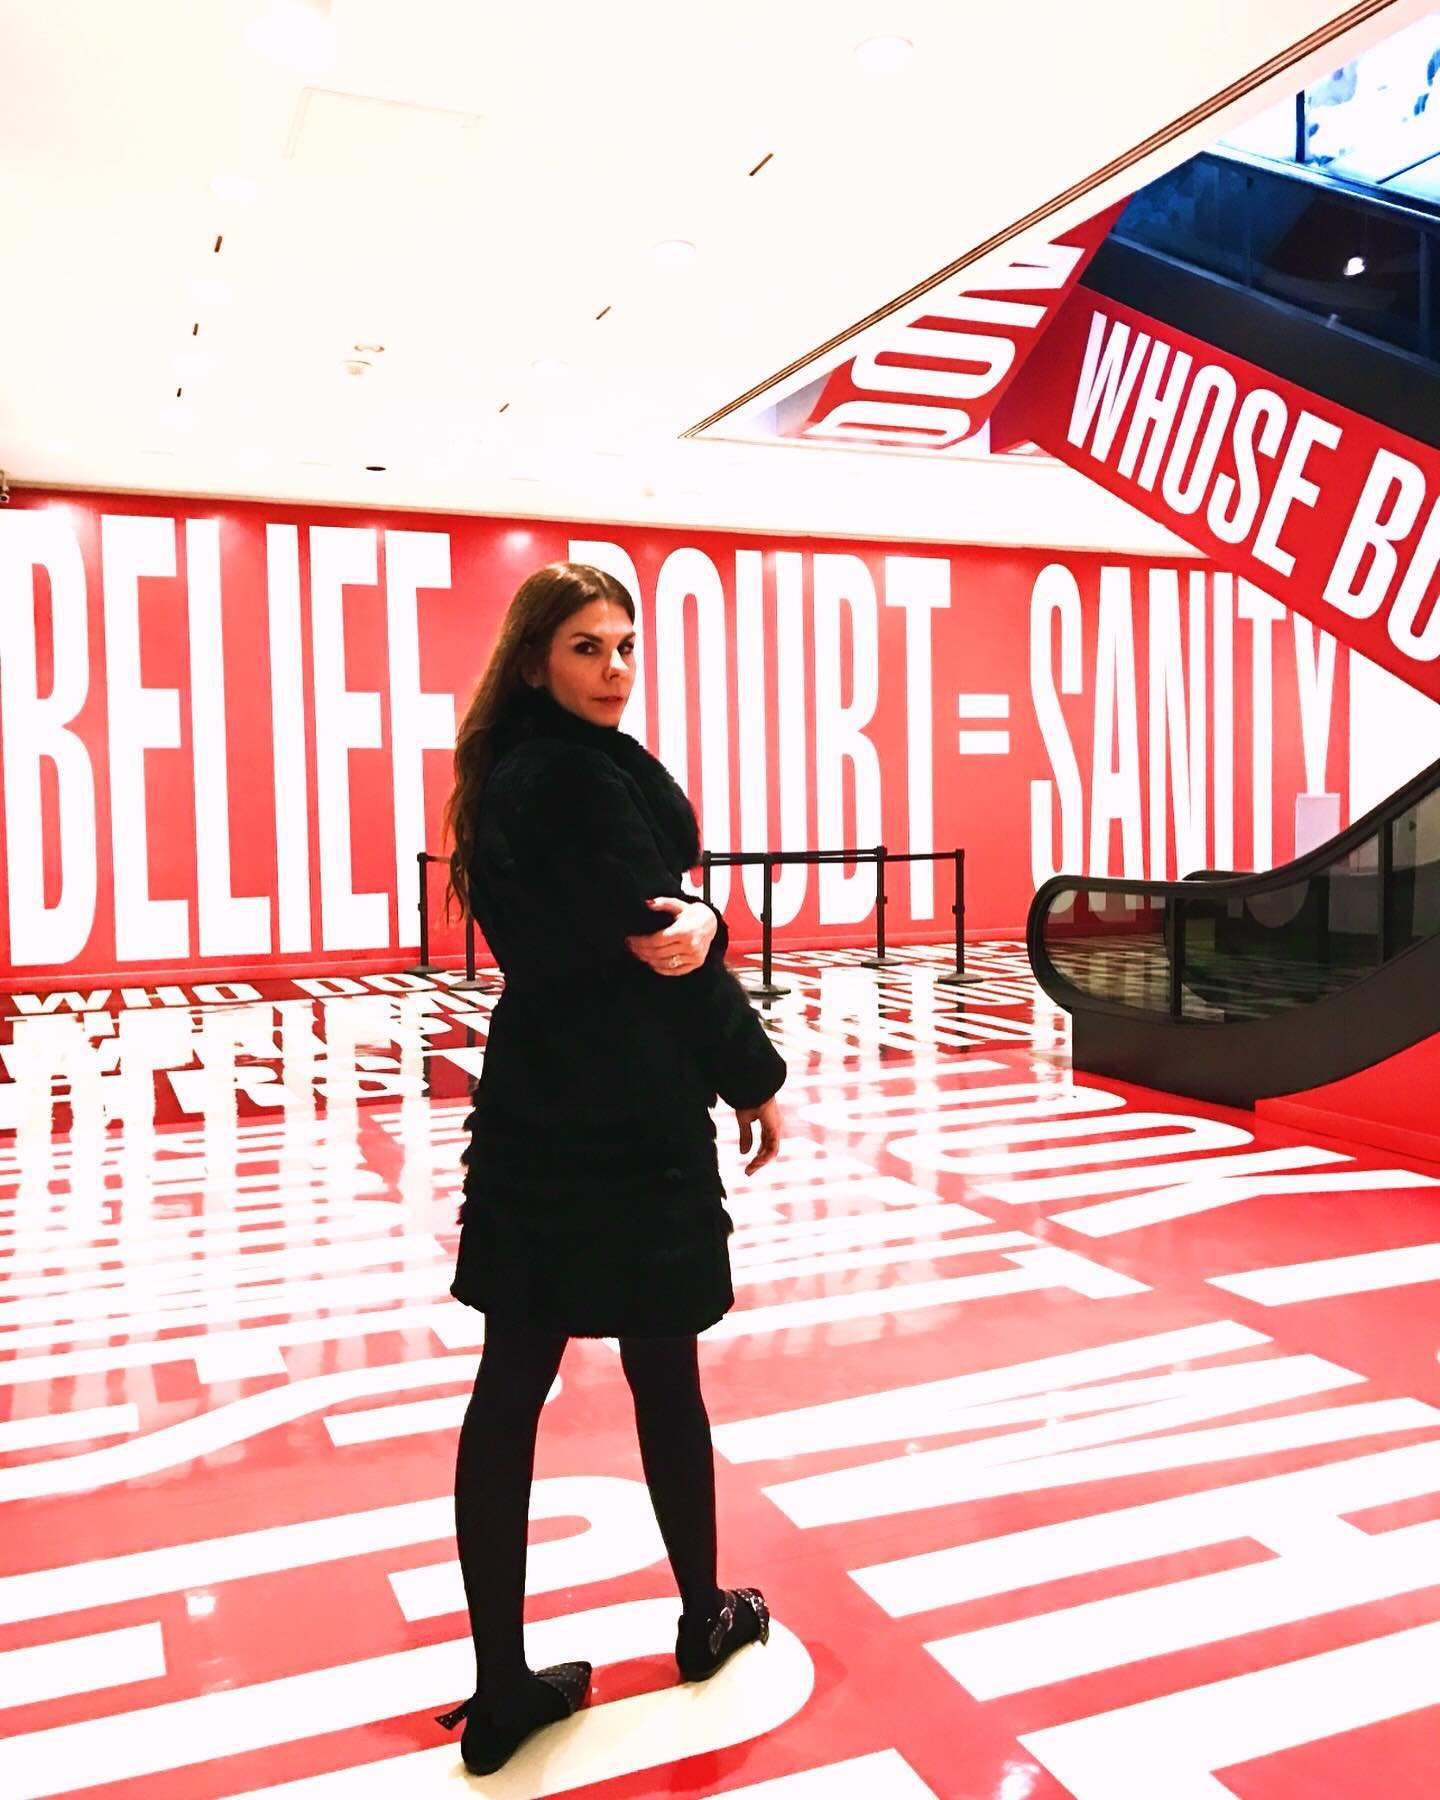 Eclipses obscure the light to or from another celestial body. 

In @barbarakruger45&rsquo;s equation of Belief + Doubt = Sanity, lies a profound truth: fanaticism, born from an absence of light and also the absence of doubt, is the harbinger of intel